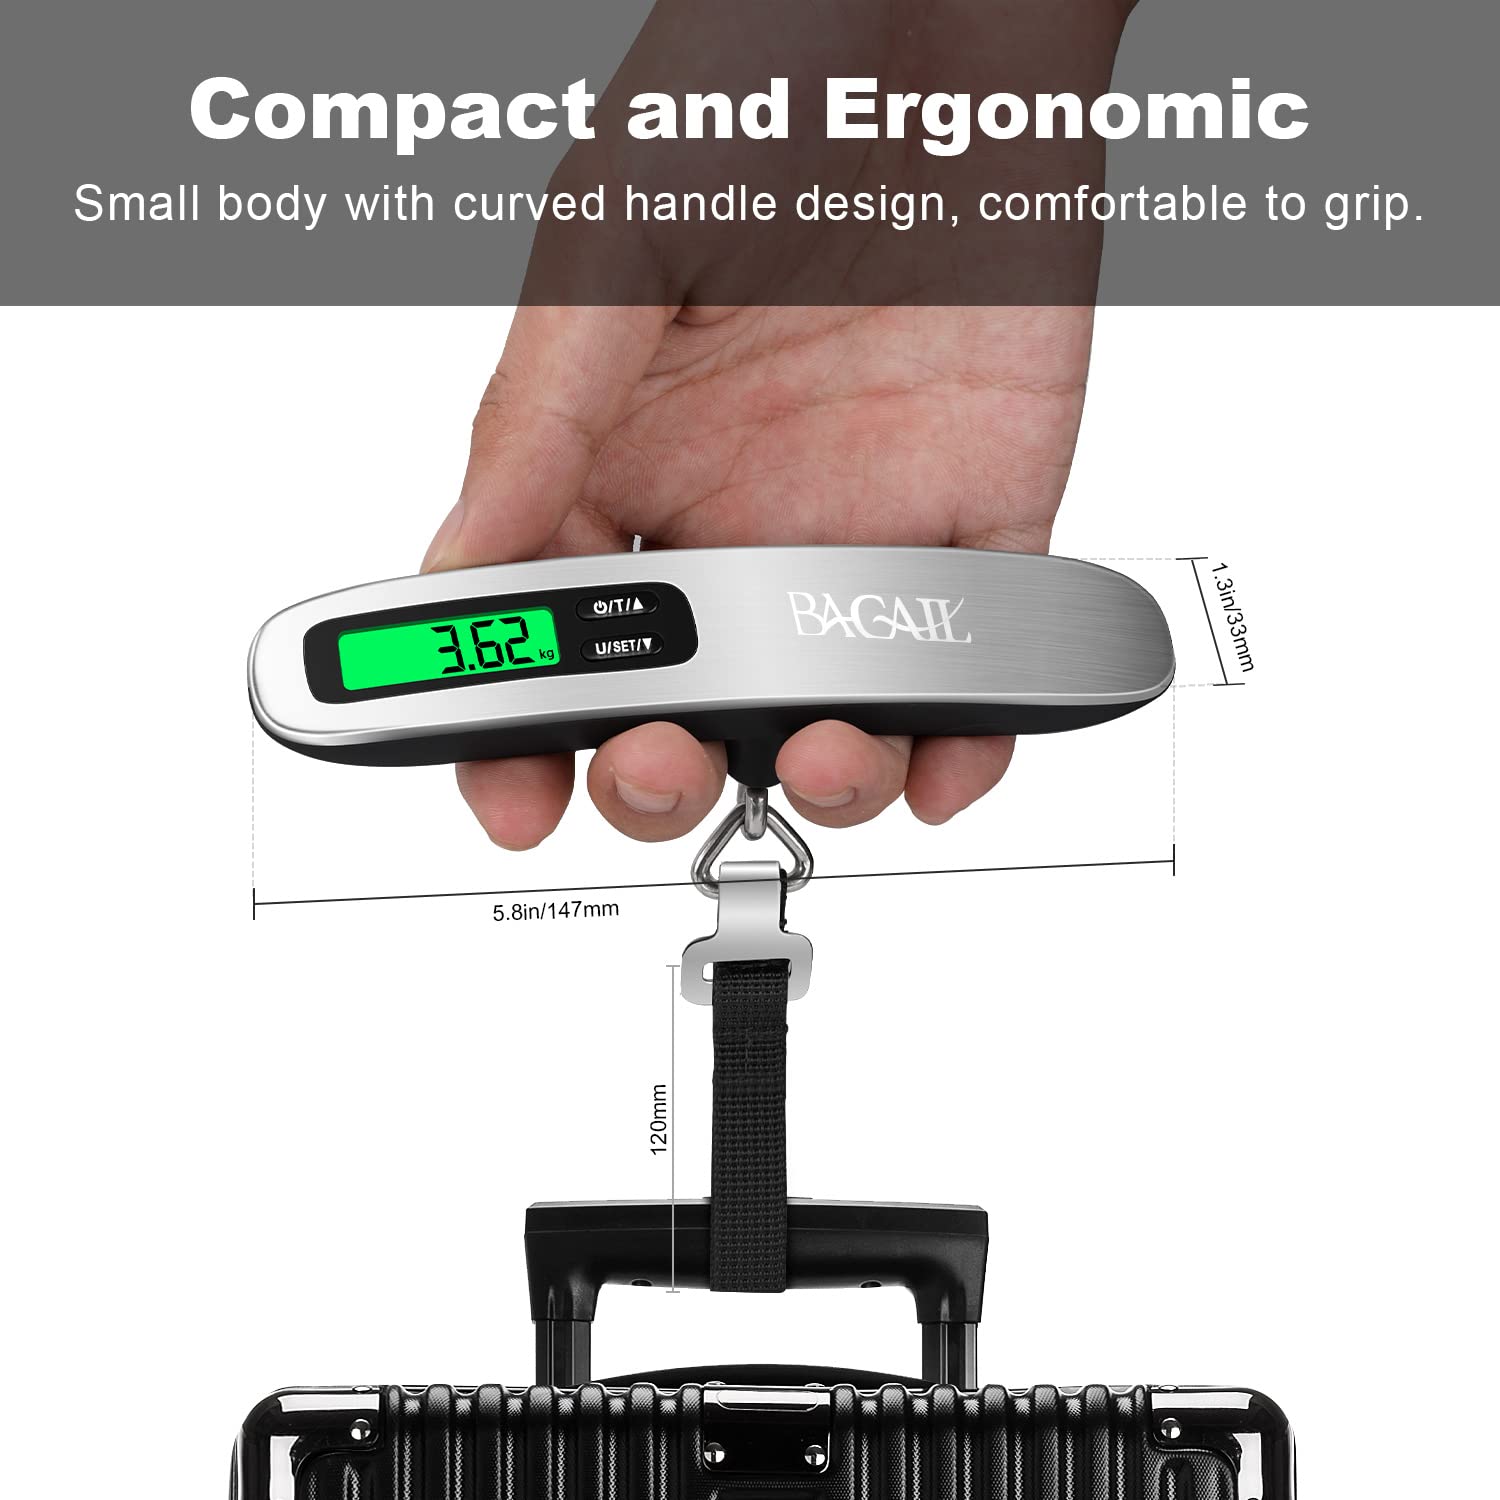 Portable LCD Digital Luggage Weight Scales Hanging Suitcase